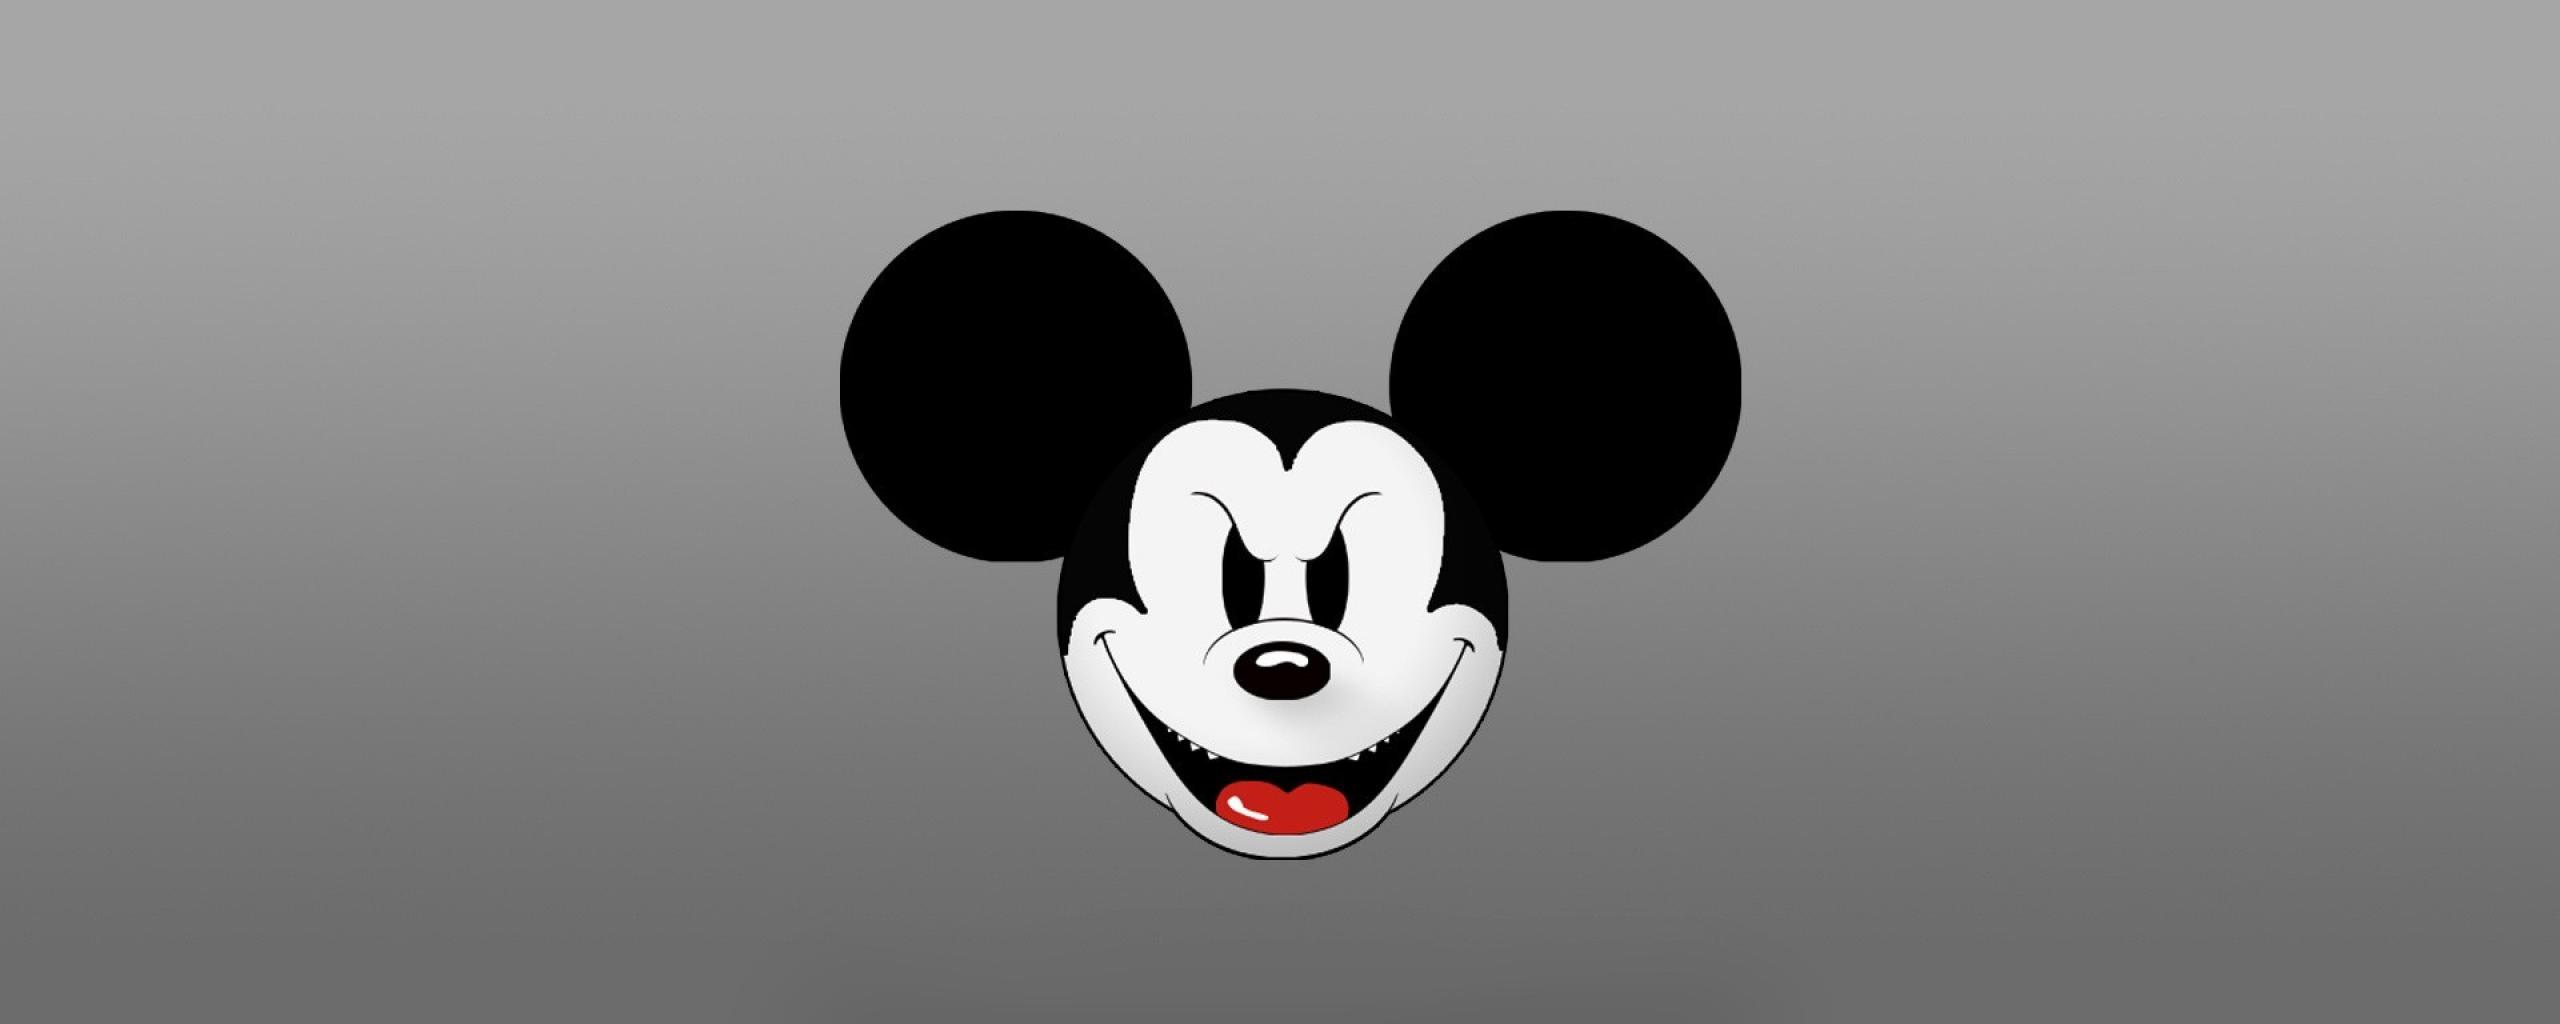 Star Wars Report Podcast. cartoons-evil-mickey-mouse-logos-1024 × 2560. 